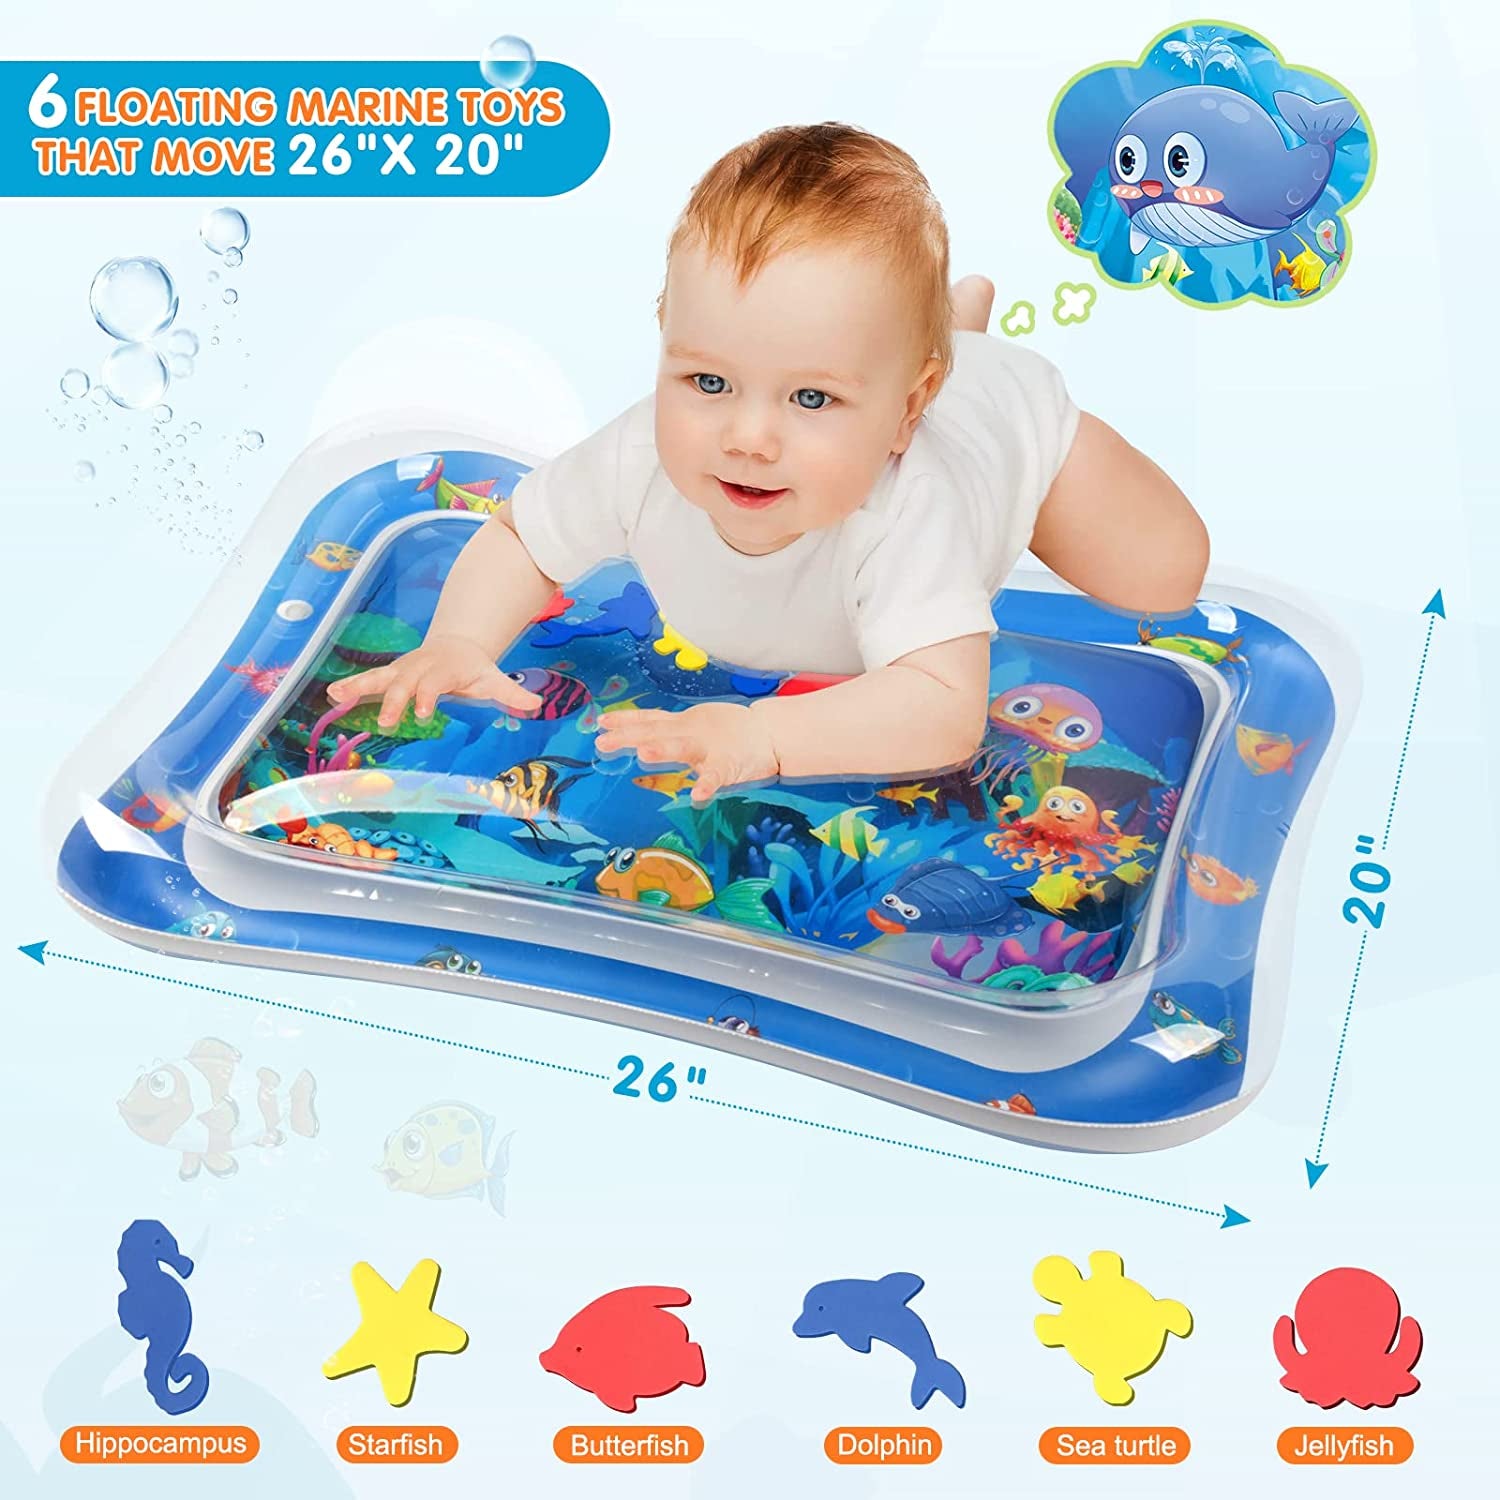 Infinno Inflatable Tummy Time Mat Premium Baby Water Play Mat for Infants and Toddlers Baby Toys for 3 to 24 Months, Strengthen Your Baby's Muscles, Portable